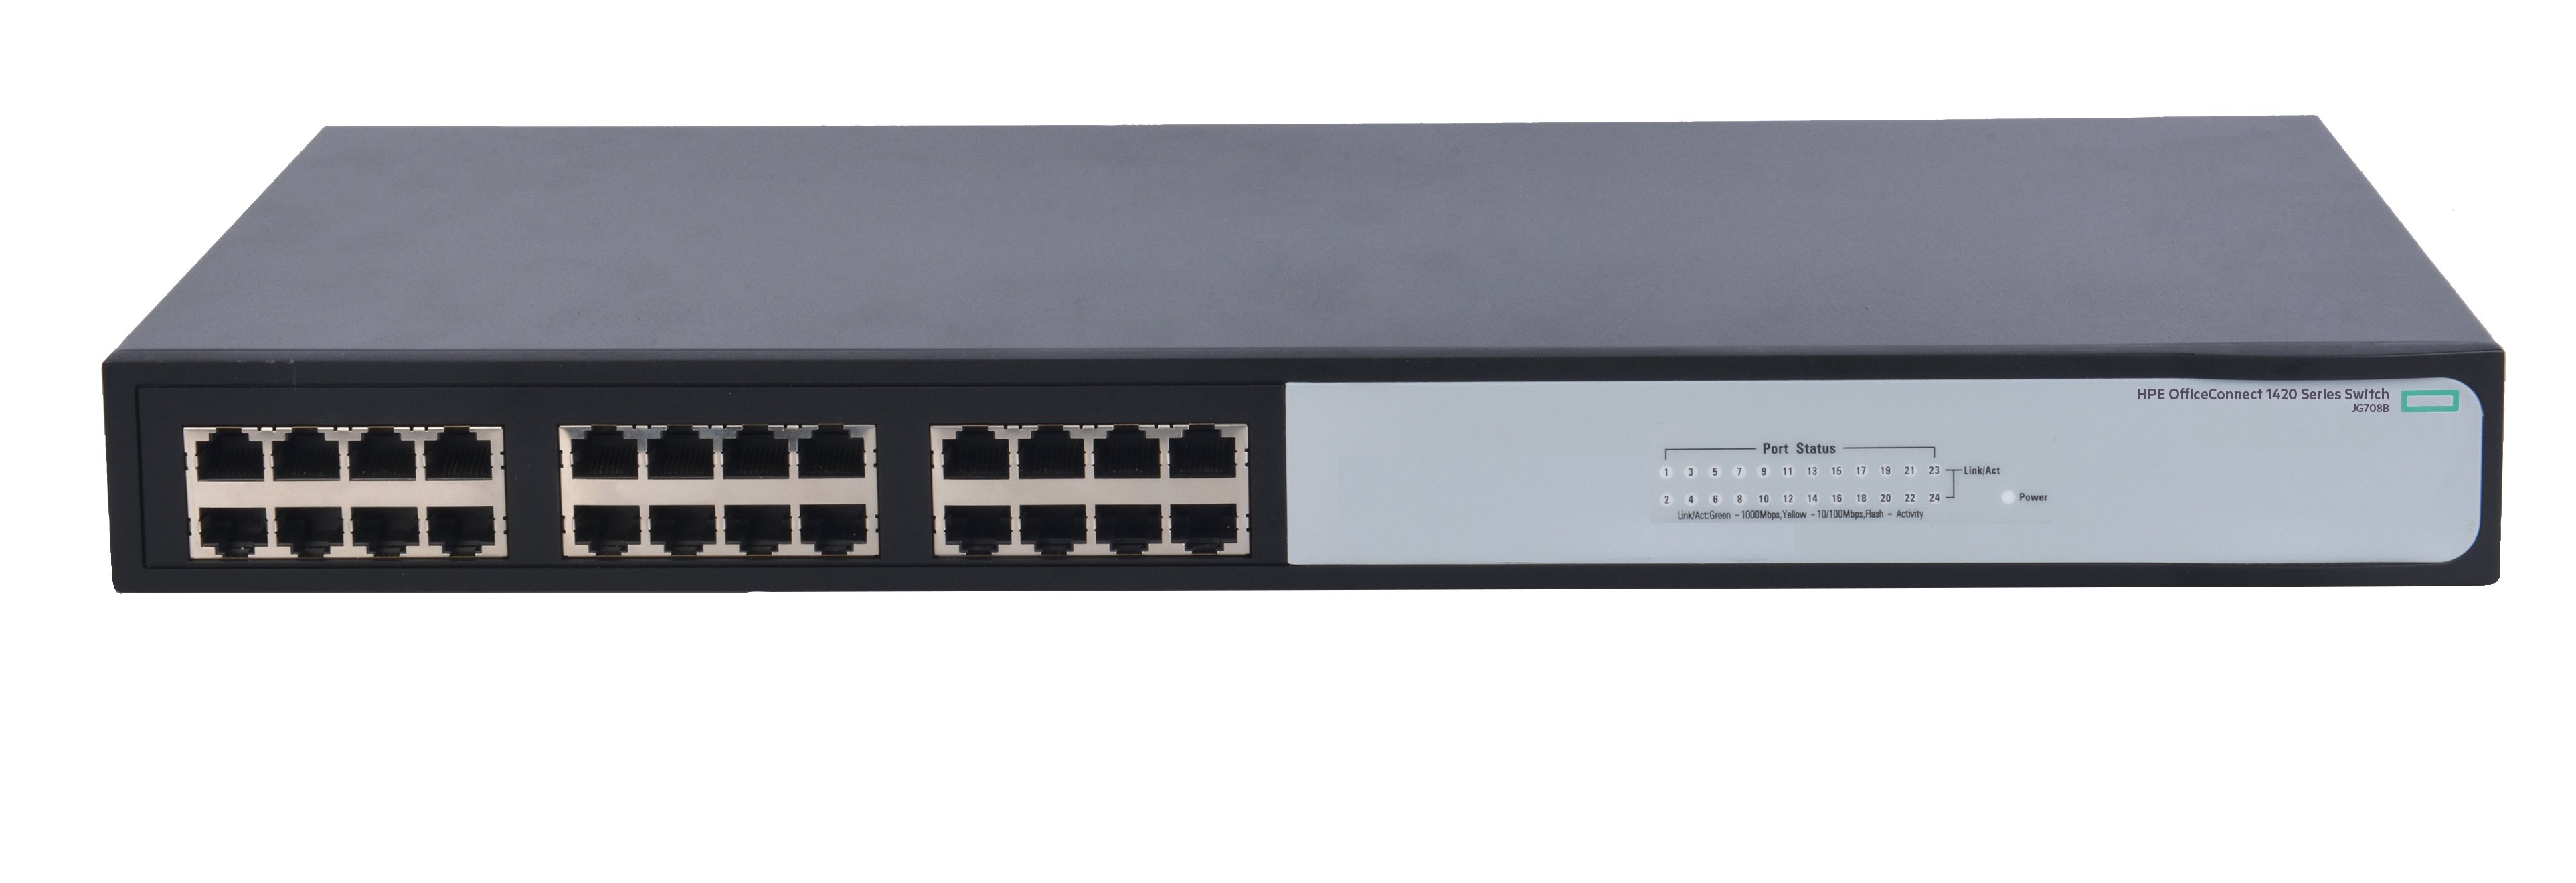 hpe-officeconnect-1420-16g-switch-jh016a